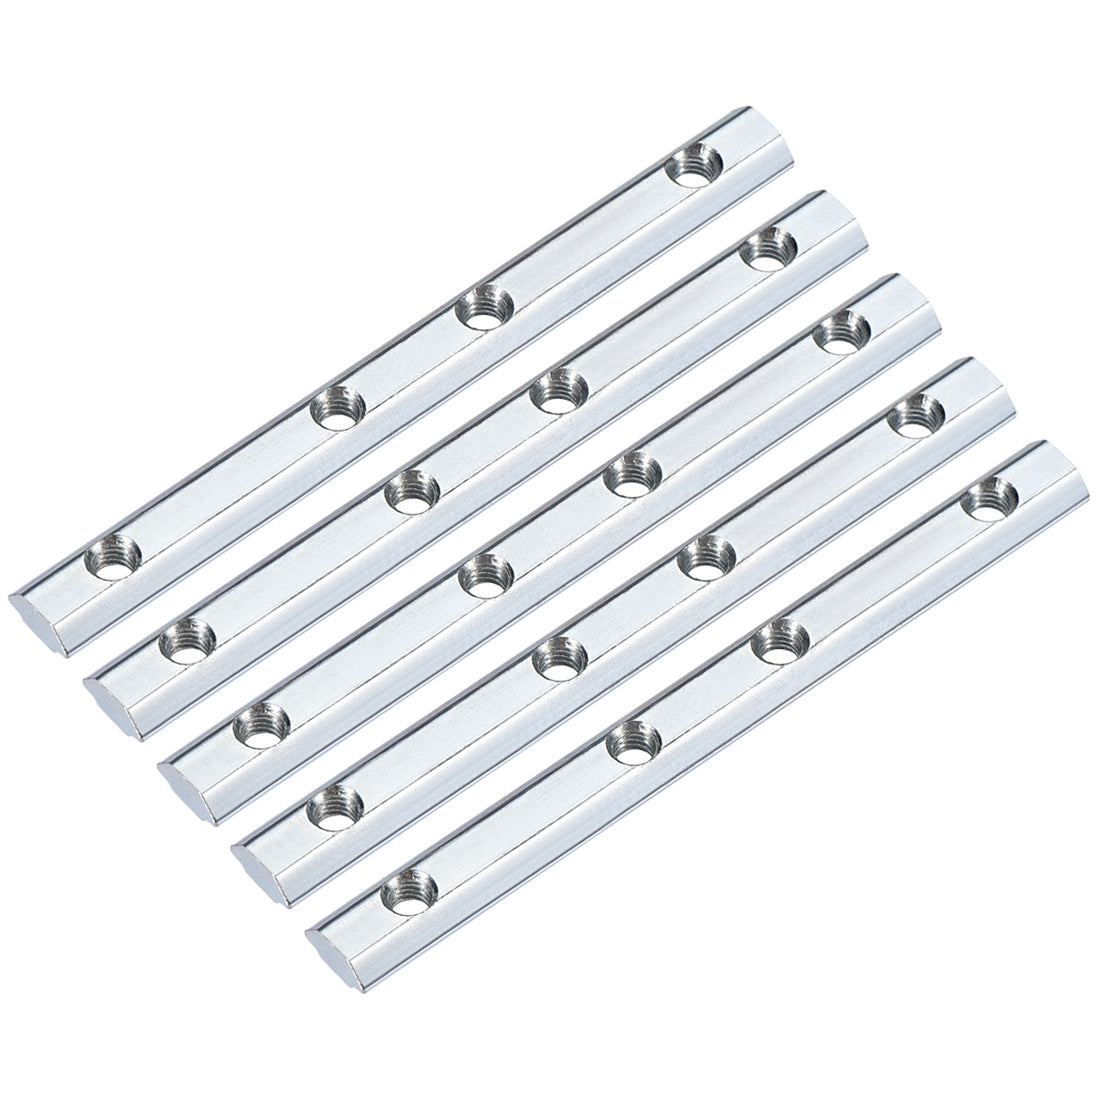 uxcell Uxcell Straight Line Connector, 3.9 Inch Joint Bracket for 2020 Series T Slot 6mm Aluminum Extrusion Profile, 5 Pcs